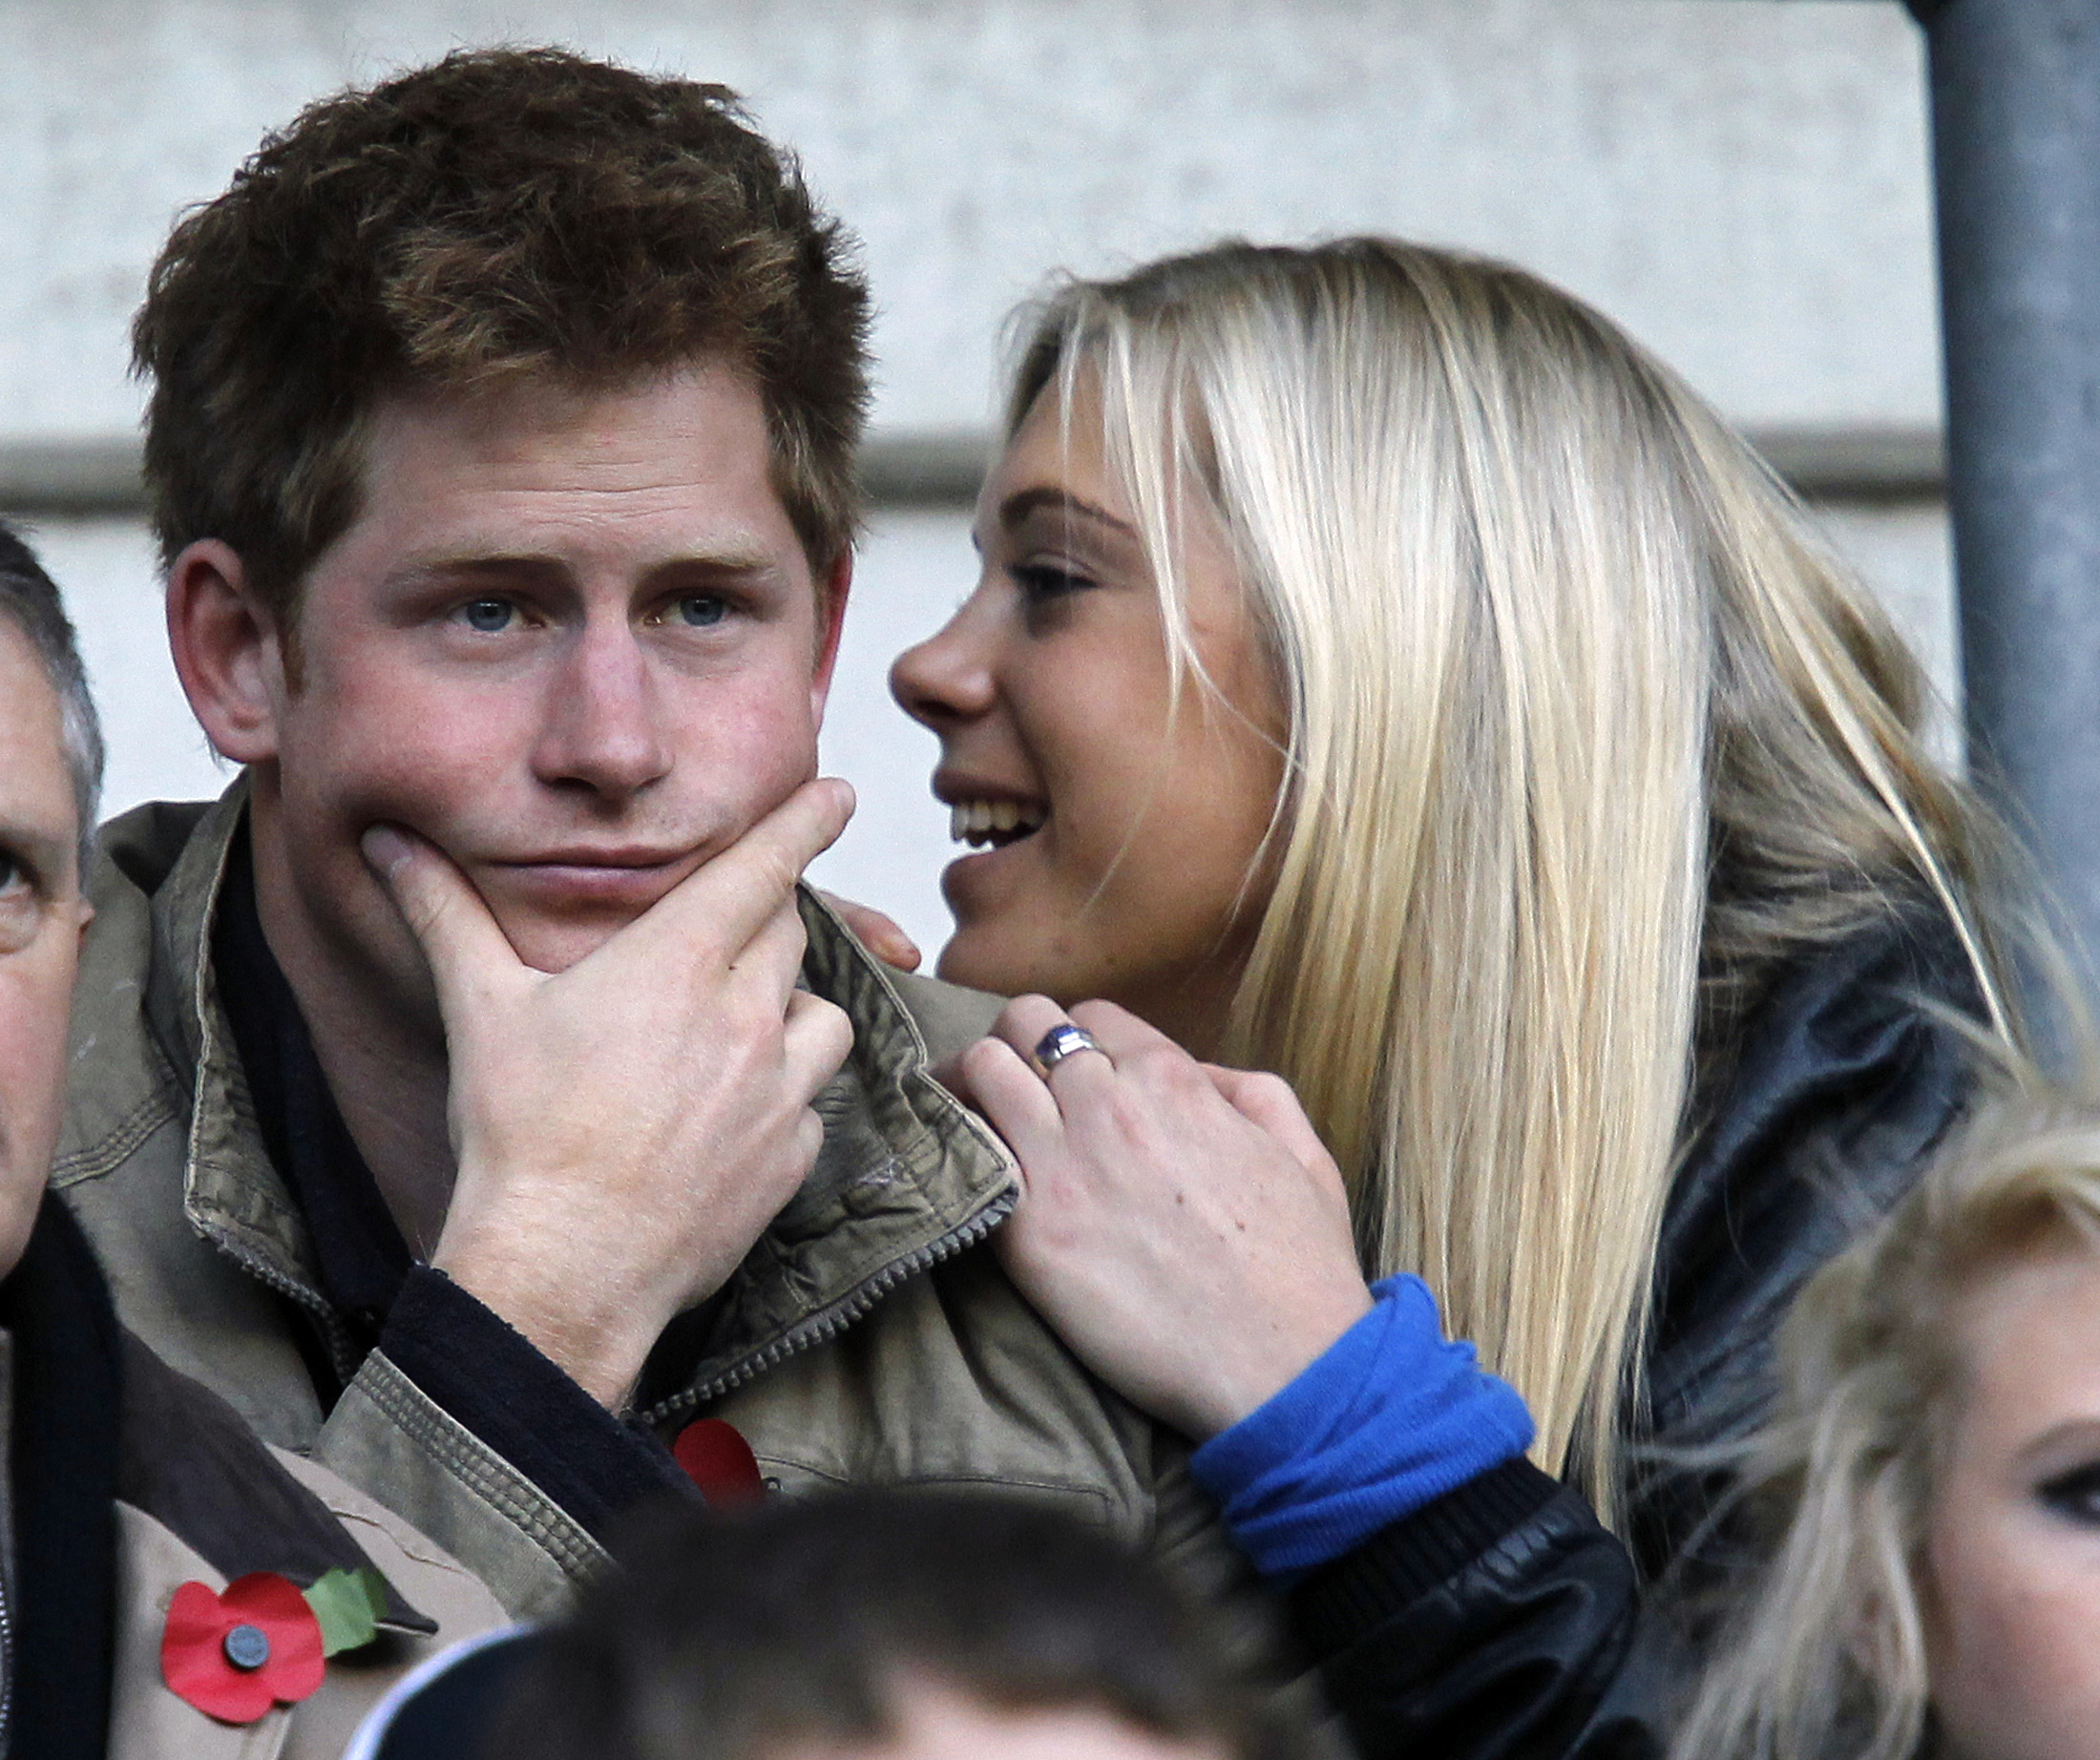 Prince Harry and Chelsy Davy attend the friendly international rugby union match between England and Australia in London